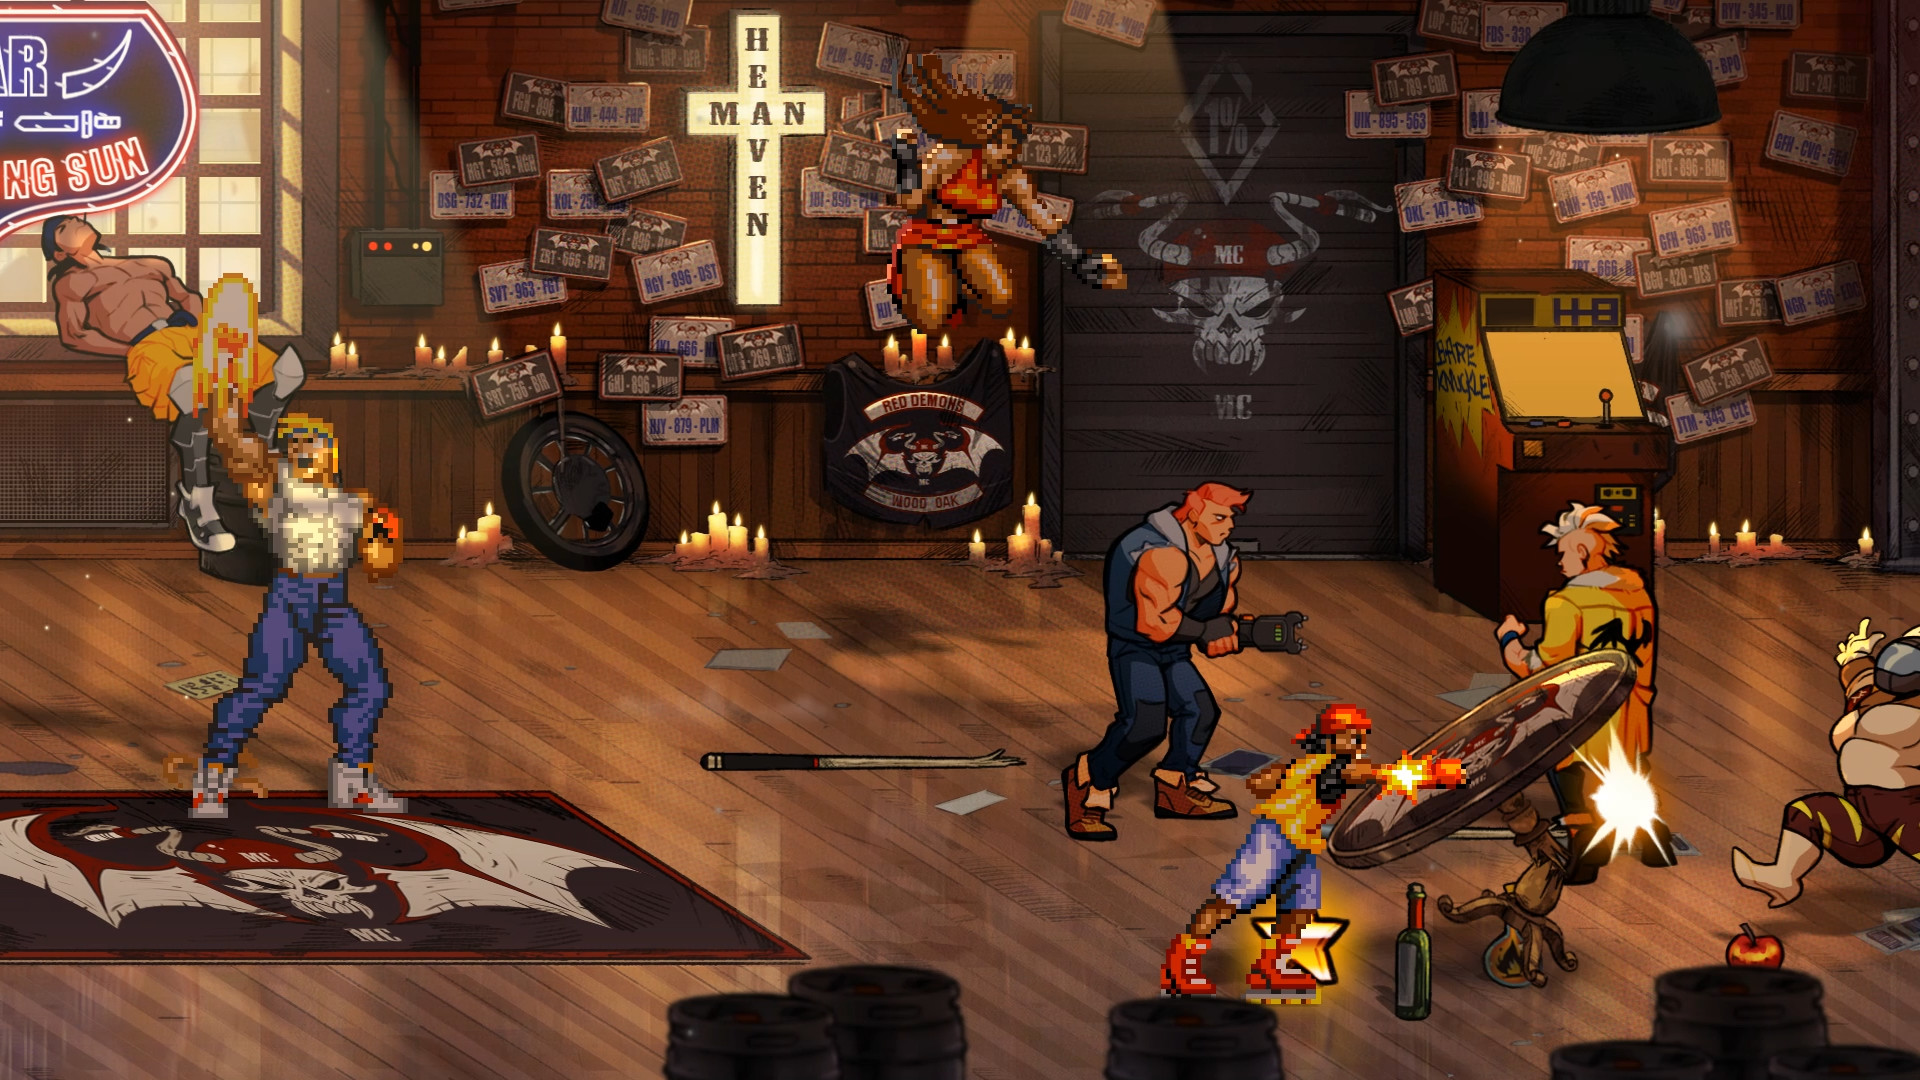 street of rage 4 apk download for android